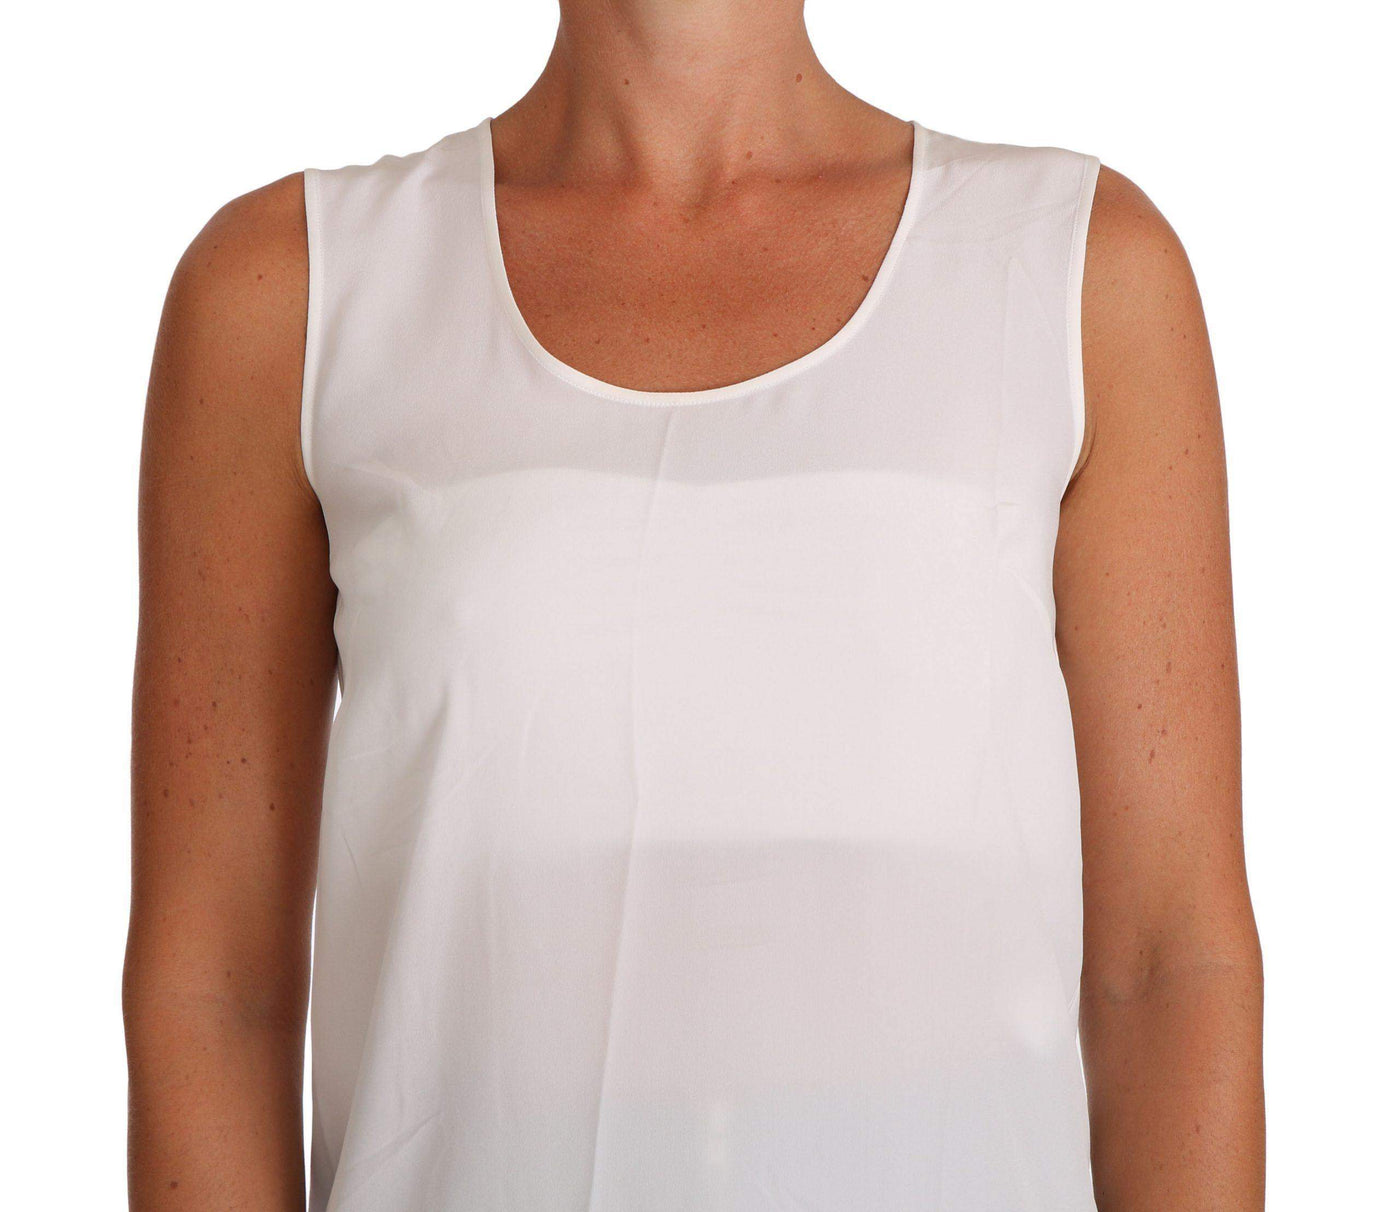 Dolce & Gabbana  White Silk A-line Sleeveless Blouse T-Shirt Top #women, Brand_Dolce & Gabbana, Catch, Dolce & Gabbana, feed-agegroup-adult, feed-color-white, feed-gender-female, feed-size-IT36|XXS, feed-size-IT38|XS, feed-size-IT44|L, feed-size-IT48 | XL, Gender_Women, IT36|XXS, IT38|XS, IT44|L, IT48 | XL, Kogan, Tops & T-Shirts - Women - Clothing, White, Women - New Arrivals at SEYMAYKA